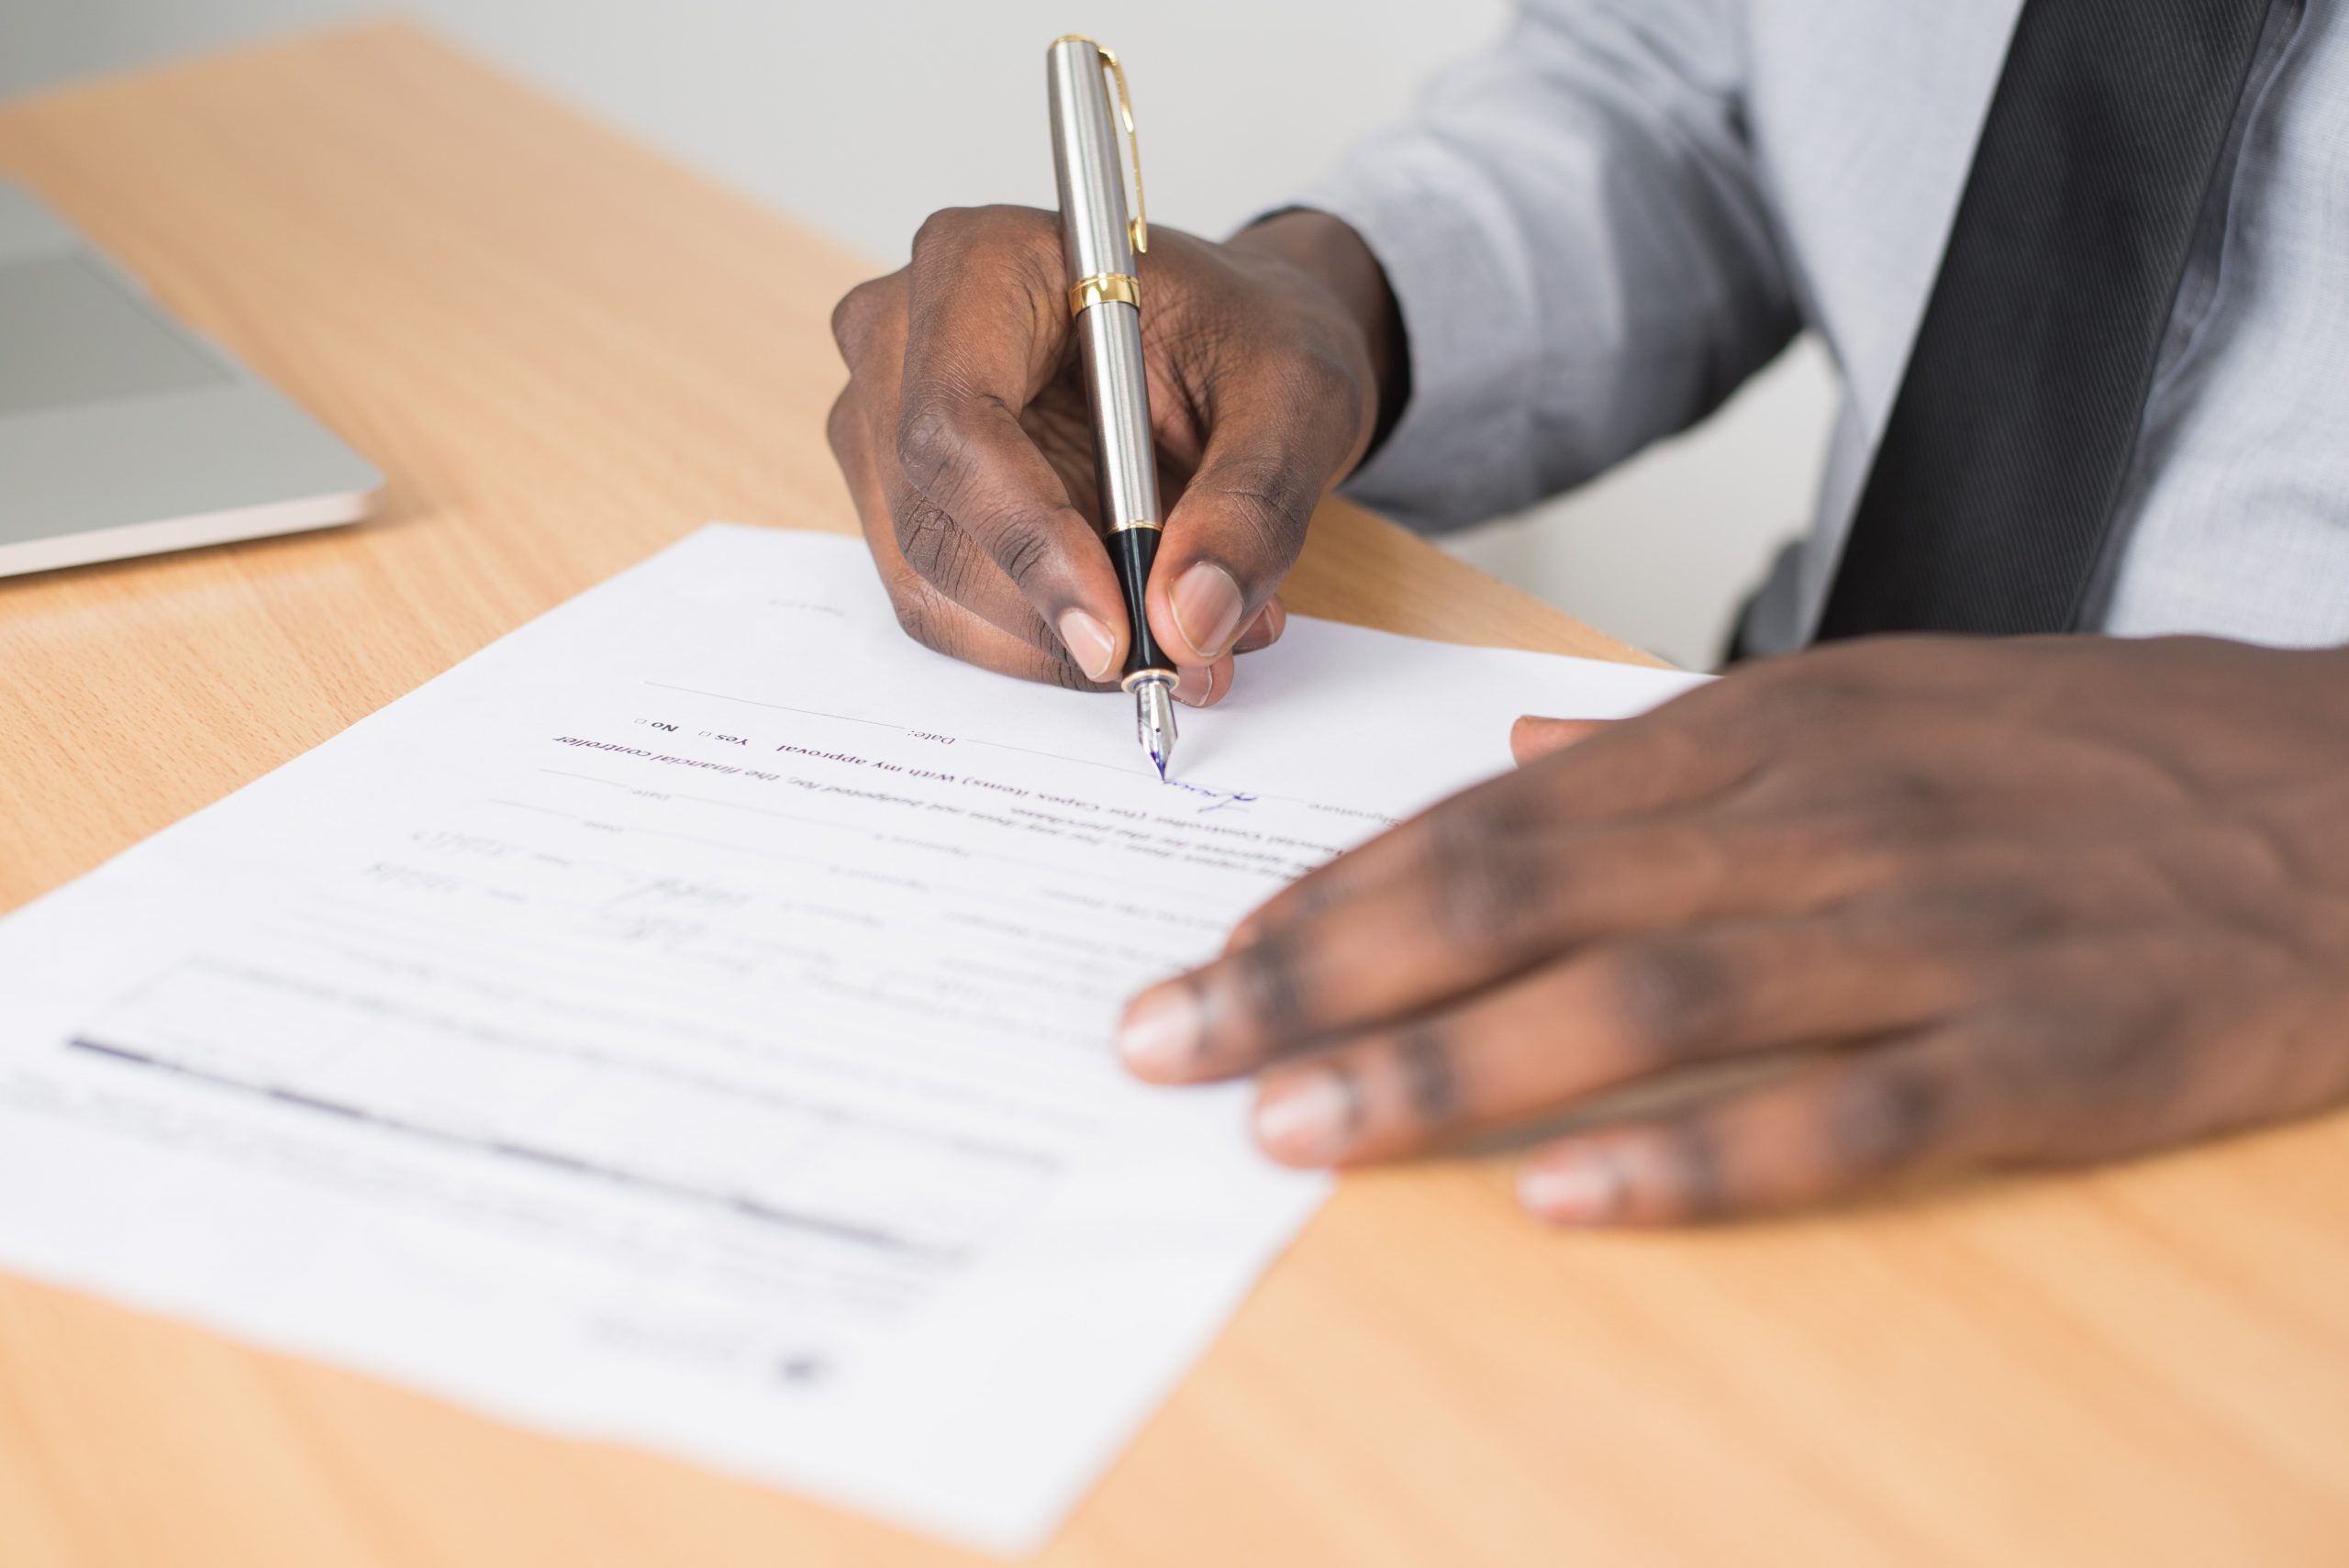 Freelancing Contract: All the Must-Have Clauses You Can’t Ignore